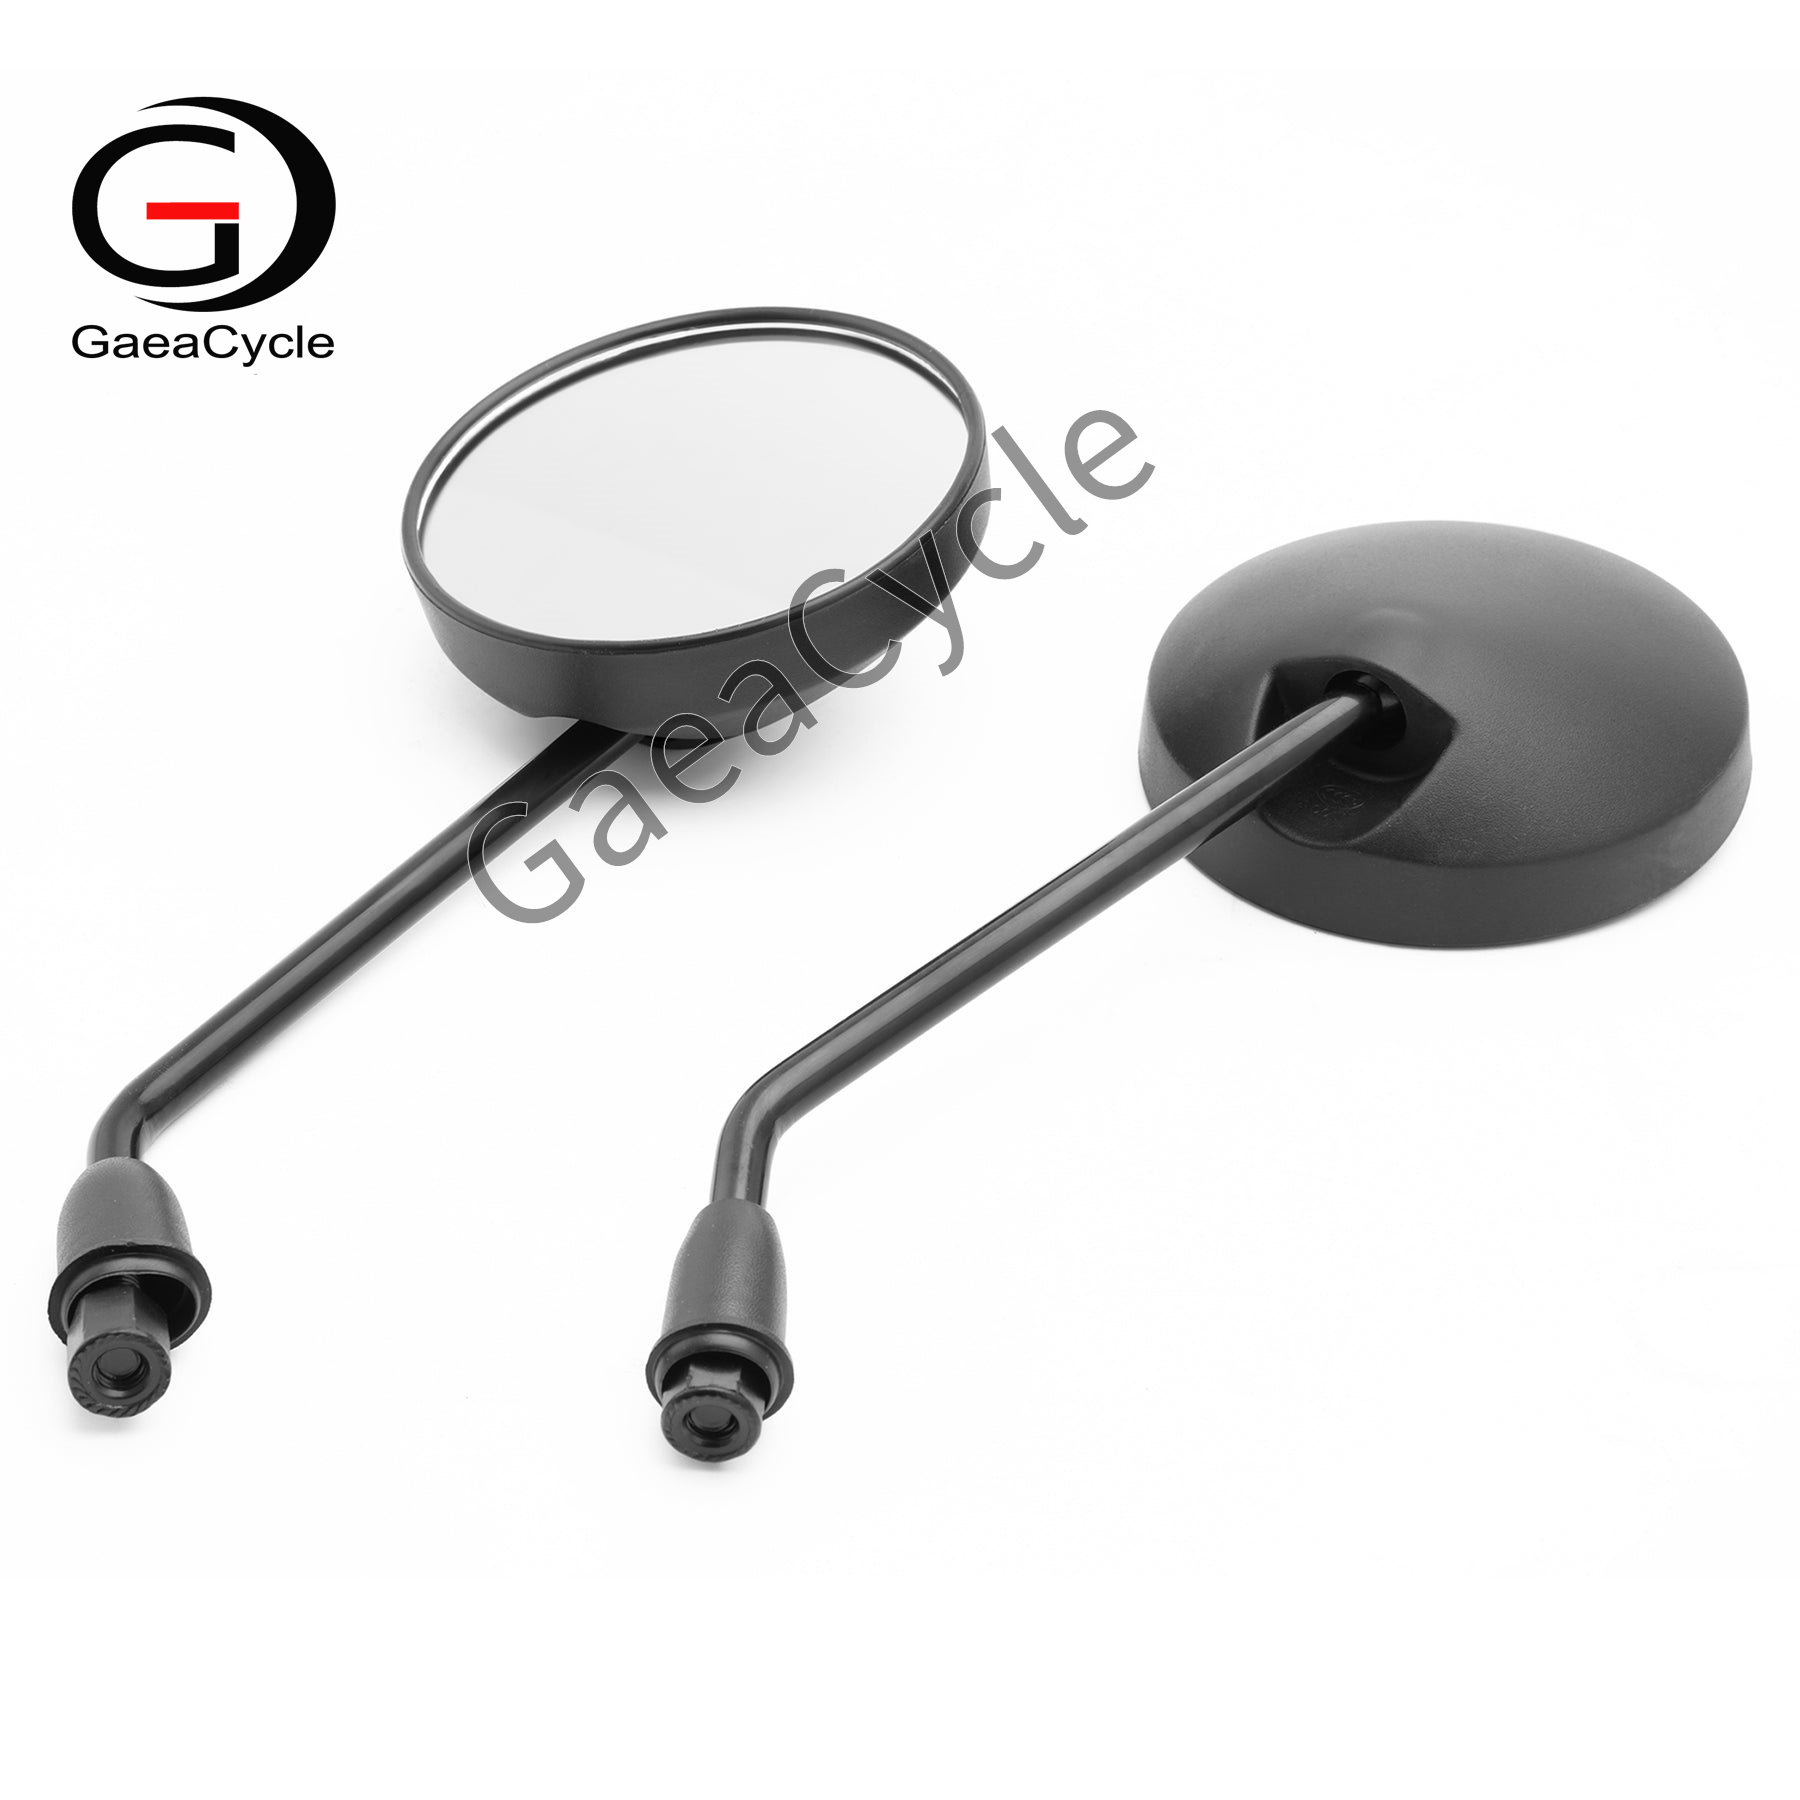 Rear View Mirror for E Chopper Scooter Sold in Pairs | Gaea Citycoco Accessories